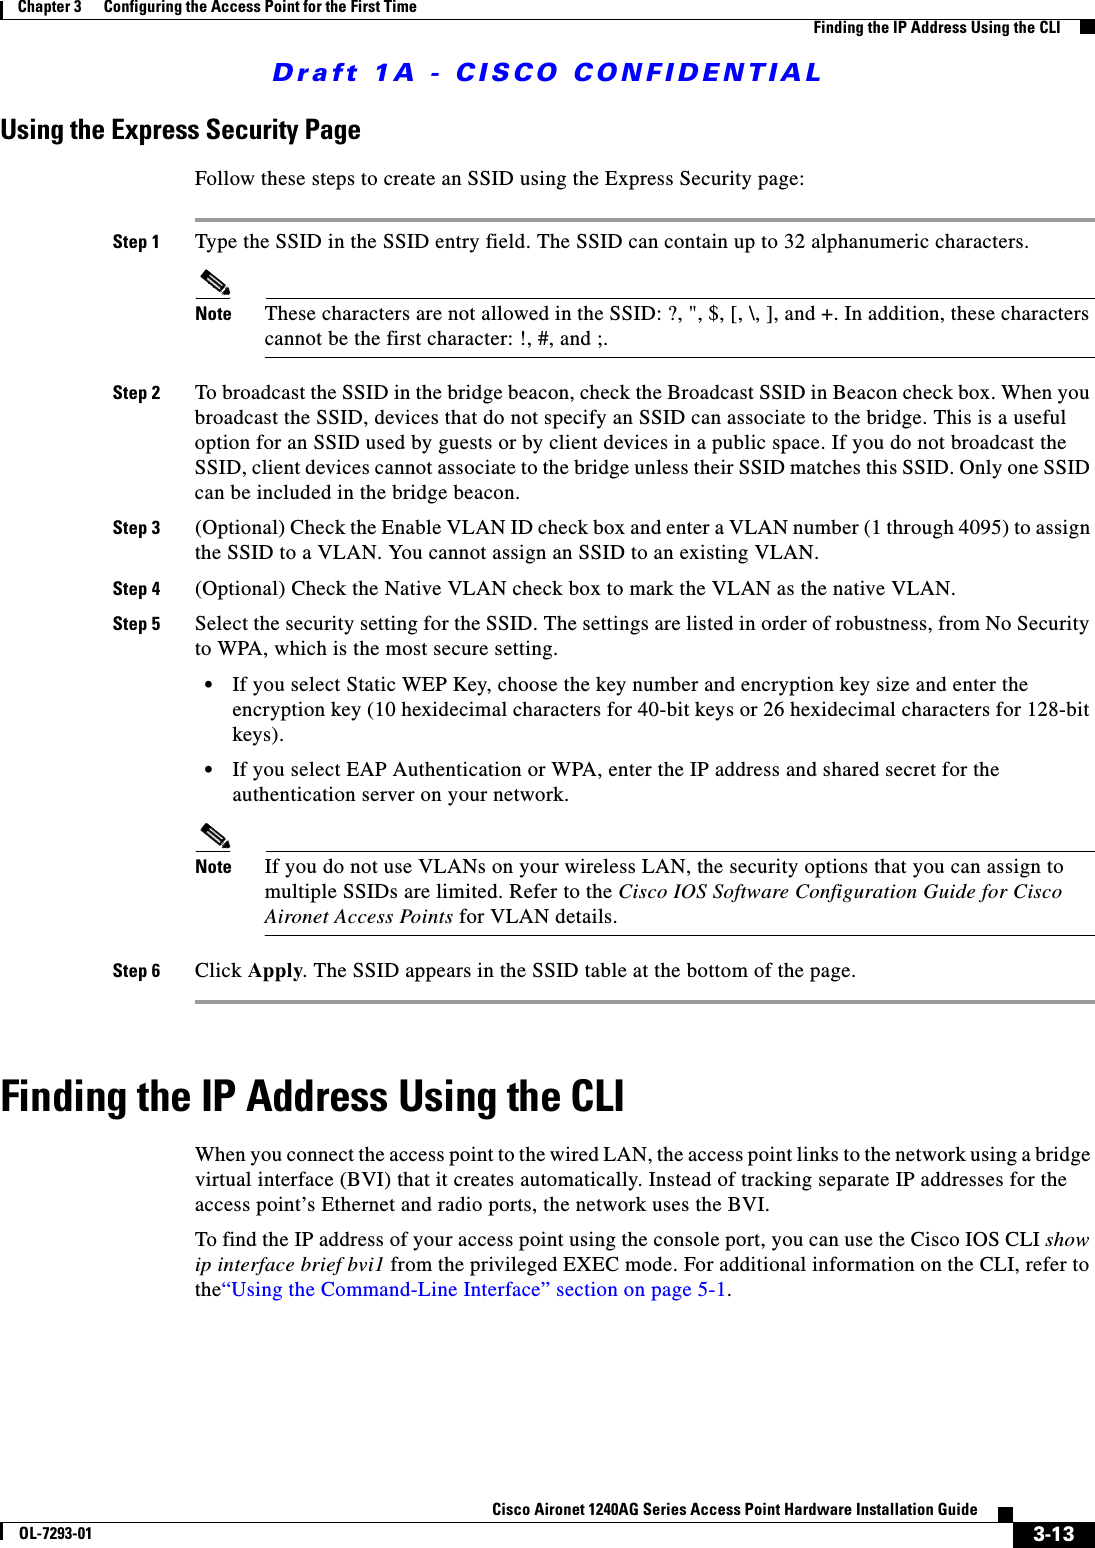 Draft 1A - CISCO CONFIDENTIAL3-13Cisco Aironet 1240AG Series Access Point Hardware Installation GuideOL-7293-01Chapter 3      Configuring the Access Point for the First TimeFinding the IP Address Using the CLIUsing the Express Security PageFollow these steps to create an SSID using the Express Security page:Step 1 Type the SSID in the SSID entry field. The SSID can contain up to 32 alphanumeric characters.Note These characters are not allowed in the SSID: ?, &quot;, $, [, \, ], and +. In addition, these characters cannot be the first character: !, #, and ;.Step 2 To broadcast the SSID in the bridge beacon, check the Broadcast SSID in Beacon check box. When you broadcast the SSID, devices that do not specify an SSID can associate to the bridge. This is a useful option for an SSID used by guests or by client devices in a public space. If you do not broadcast the SSID, client devices cannot associate to the bridge unless their SSID matches this SSID. Only one SSID can be included in the bridge beacon.Step 3 (Optional) Check the Enable VLAN ID check box and enter a VLAN number (1 through 4095) to assign the SSID to a VLAN. You cannot assign an SSID to an existing VLAN.Step 4 (Optional) Check the Native VLAN check box to mark the VLAN as the native VLAN. Step 5 Select the security setting for the SSID. The settings are listed in order of robustness, from No Security to WPA, which is the most secure setting. •If you select Static WEP Key, choose the key number and encryption key size and enter the encryption key (10 hexidecimal characters for 40-bit keys or 26 hexidecimal characters for 128-bit keys).•If you select EAP Authentication or WPA, enter the IP address and shared secret for the authentication server on your network.Note If you do not use VLANs on your wireless LAN, the security options that you can assign to multiple SSIDs are limited. Refer to the Cisco IOS Software Configuration Guide for Cisco Aironet Access Points for VLAN details.Step 6 Click Apply. The SSID appears in the SSID table at the bottom of the page.Finding the IP Address Using the CLIWhen you connect the access point to the wired LAN, the access point links to the network using a bridge virtual interface (BVI) that it creates automatically. Instead of tracking separate IP addresses for the access point’s Ethernet and radio ports, the network uses the BVI.To find the IP address of your access point using the console port, you can use the Cisco IOS CLI show ip interface brief bvi1 from the privileged EXEC mode. For additional information on the CLI, refer to the“Using the Command-Line Interface” section on page 5-1.